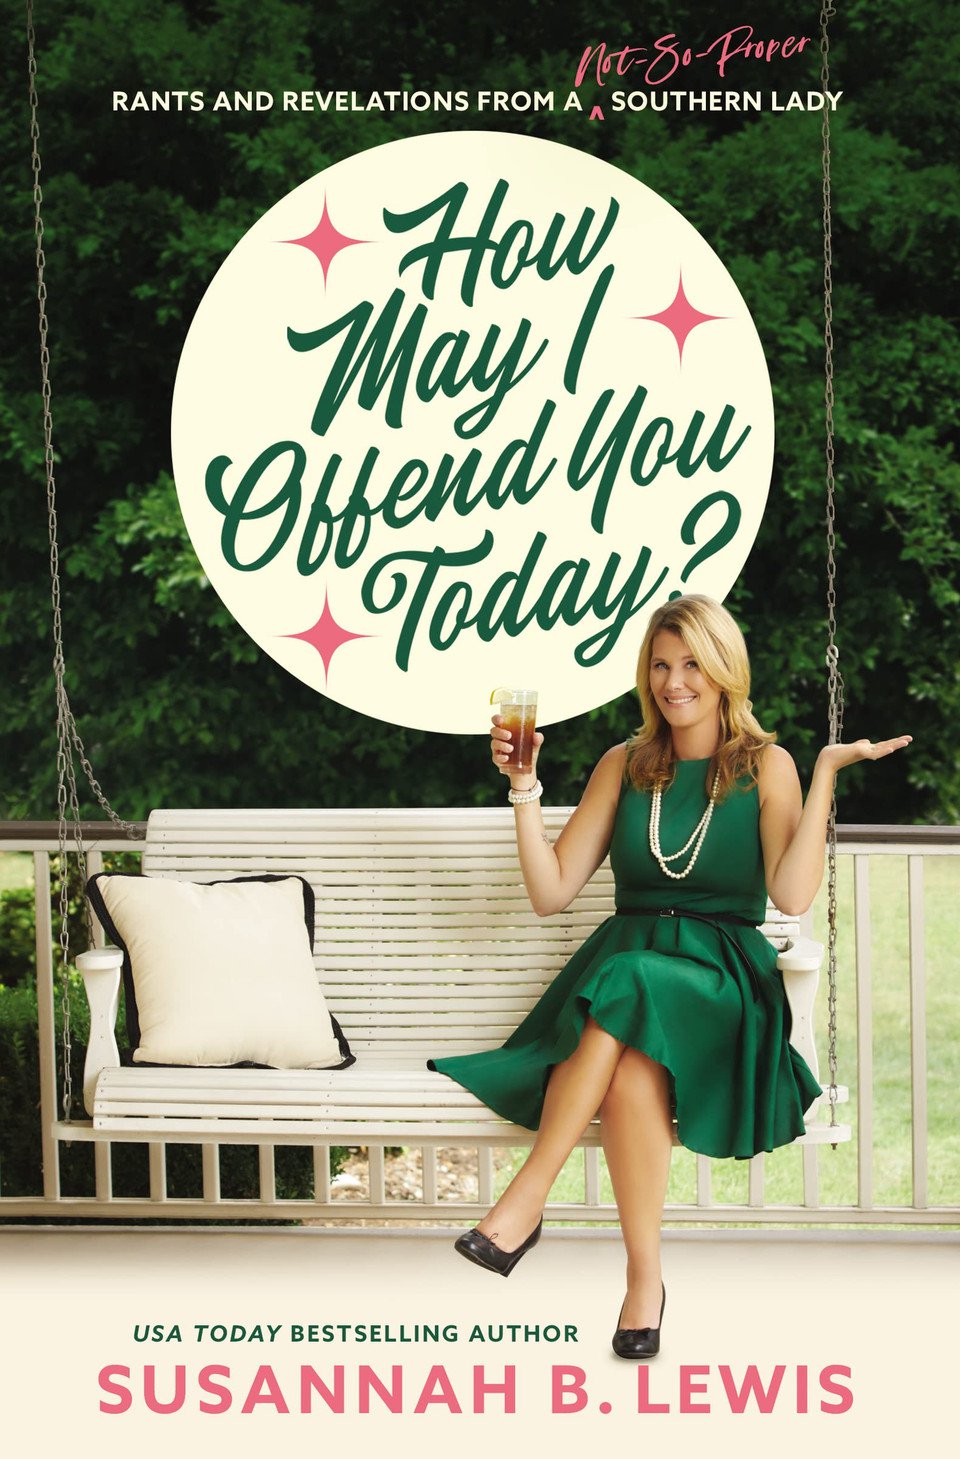 How May I Offend You Today?: Rants and Revelations from a Not-So-Proper Southern Lady